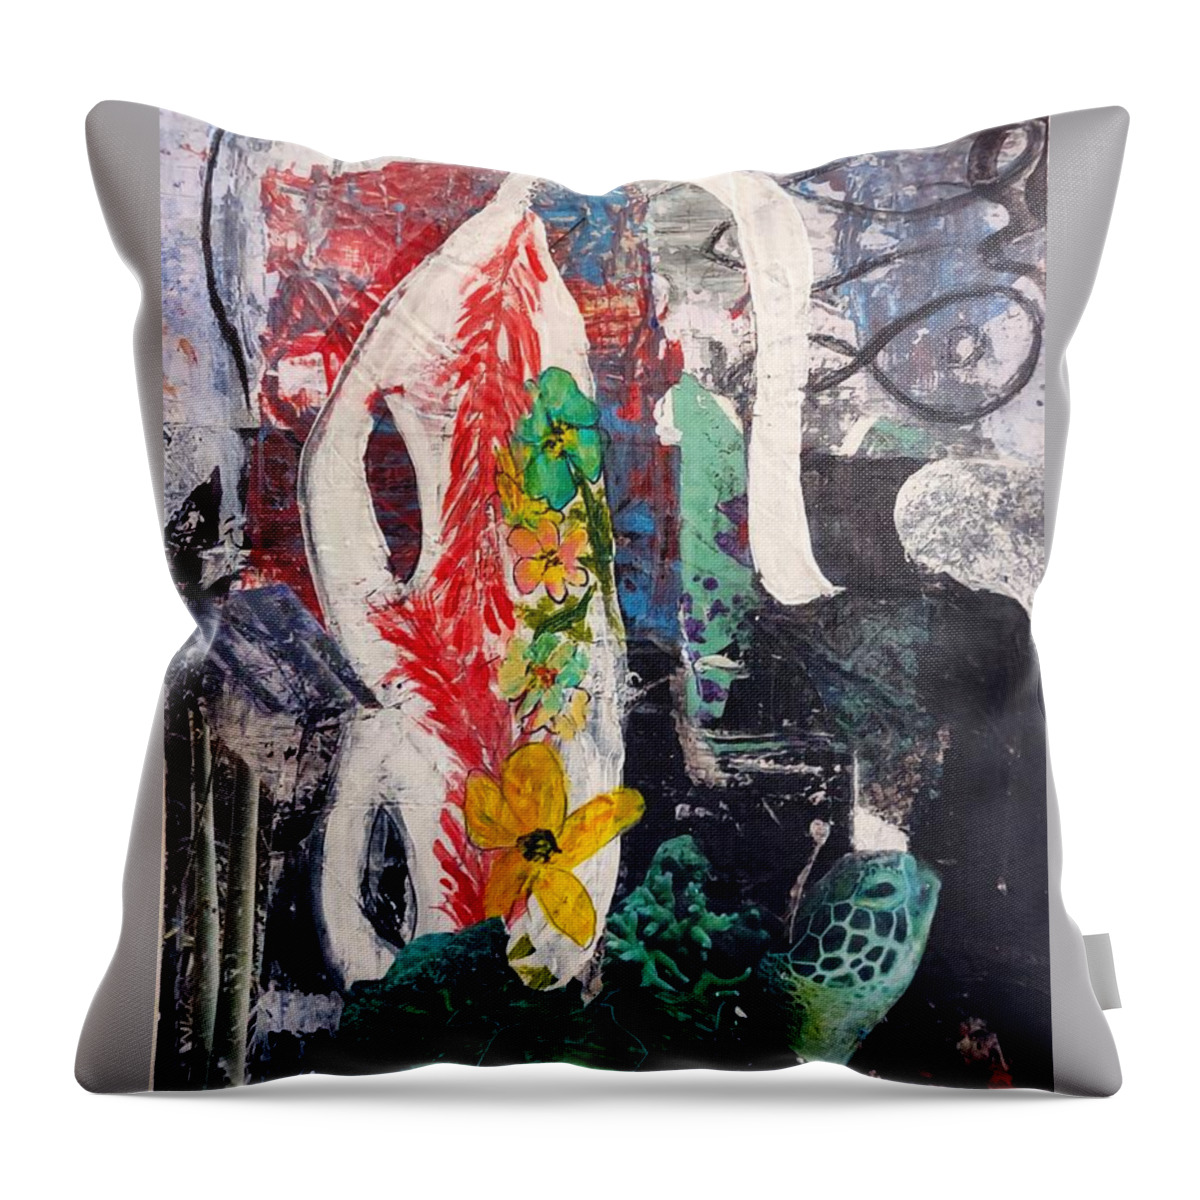  Costume Throw Pillow featuring the mixed media Purim Disguise by Suzanne Berthier